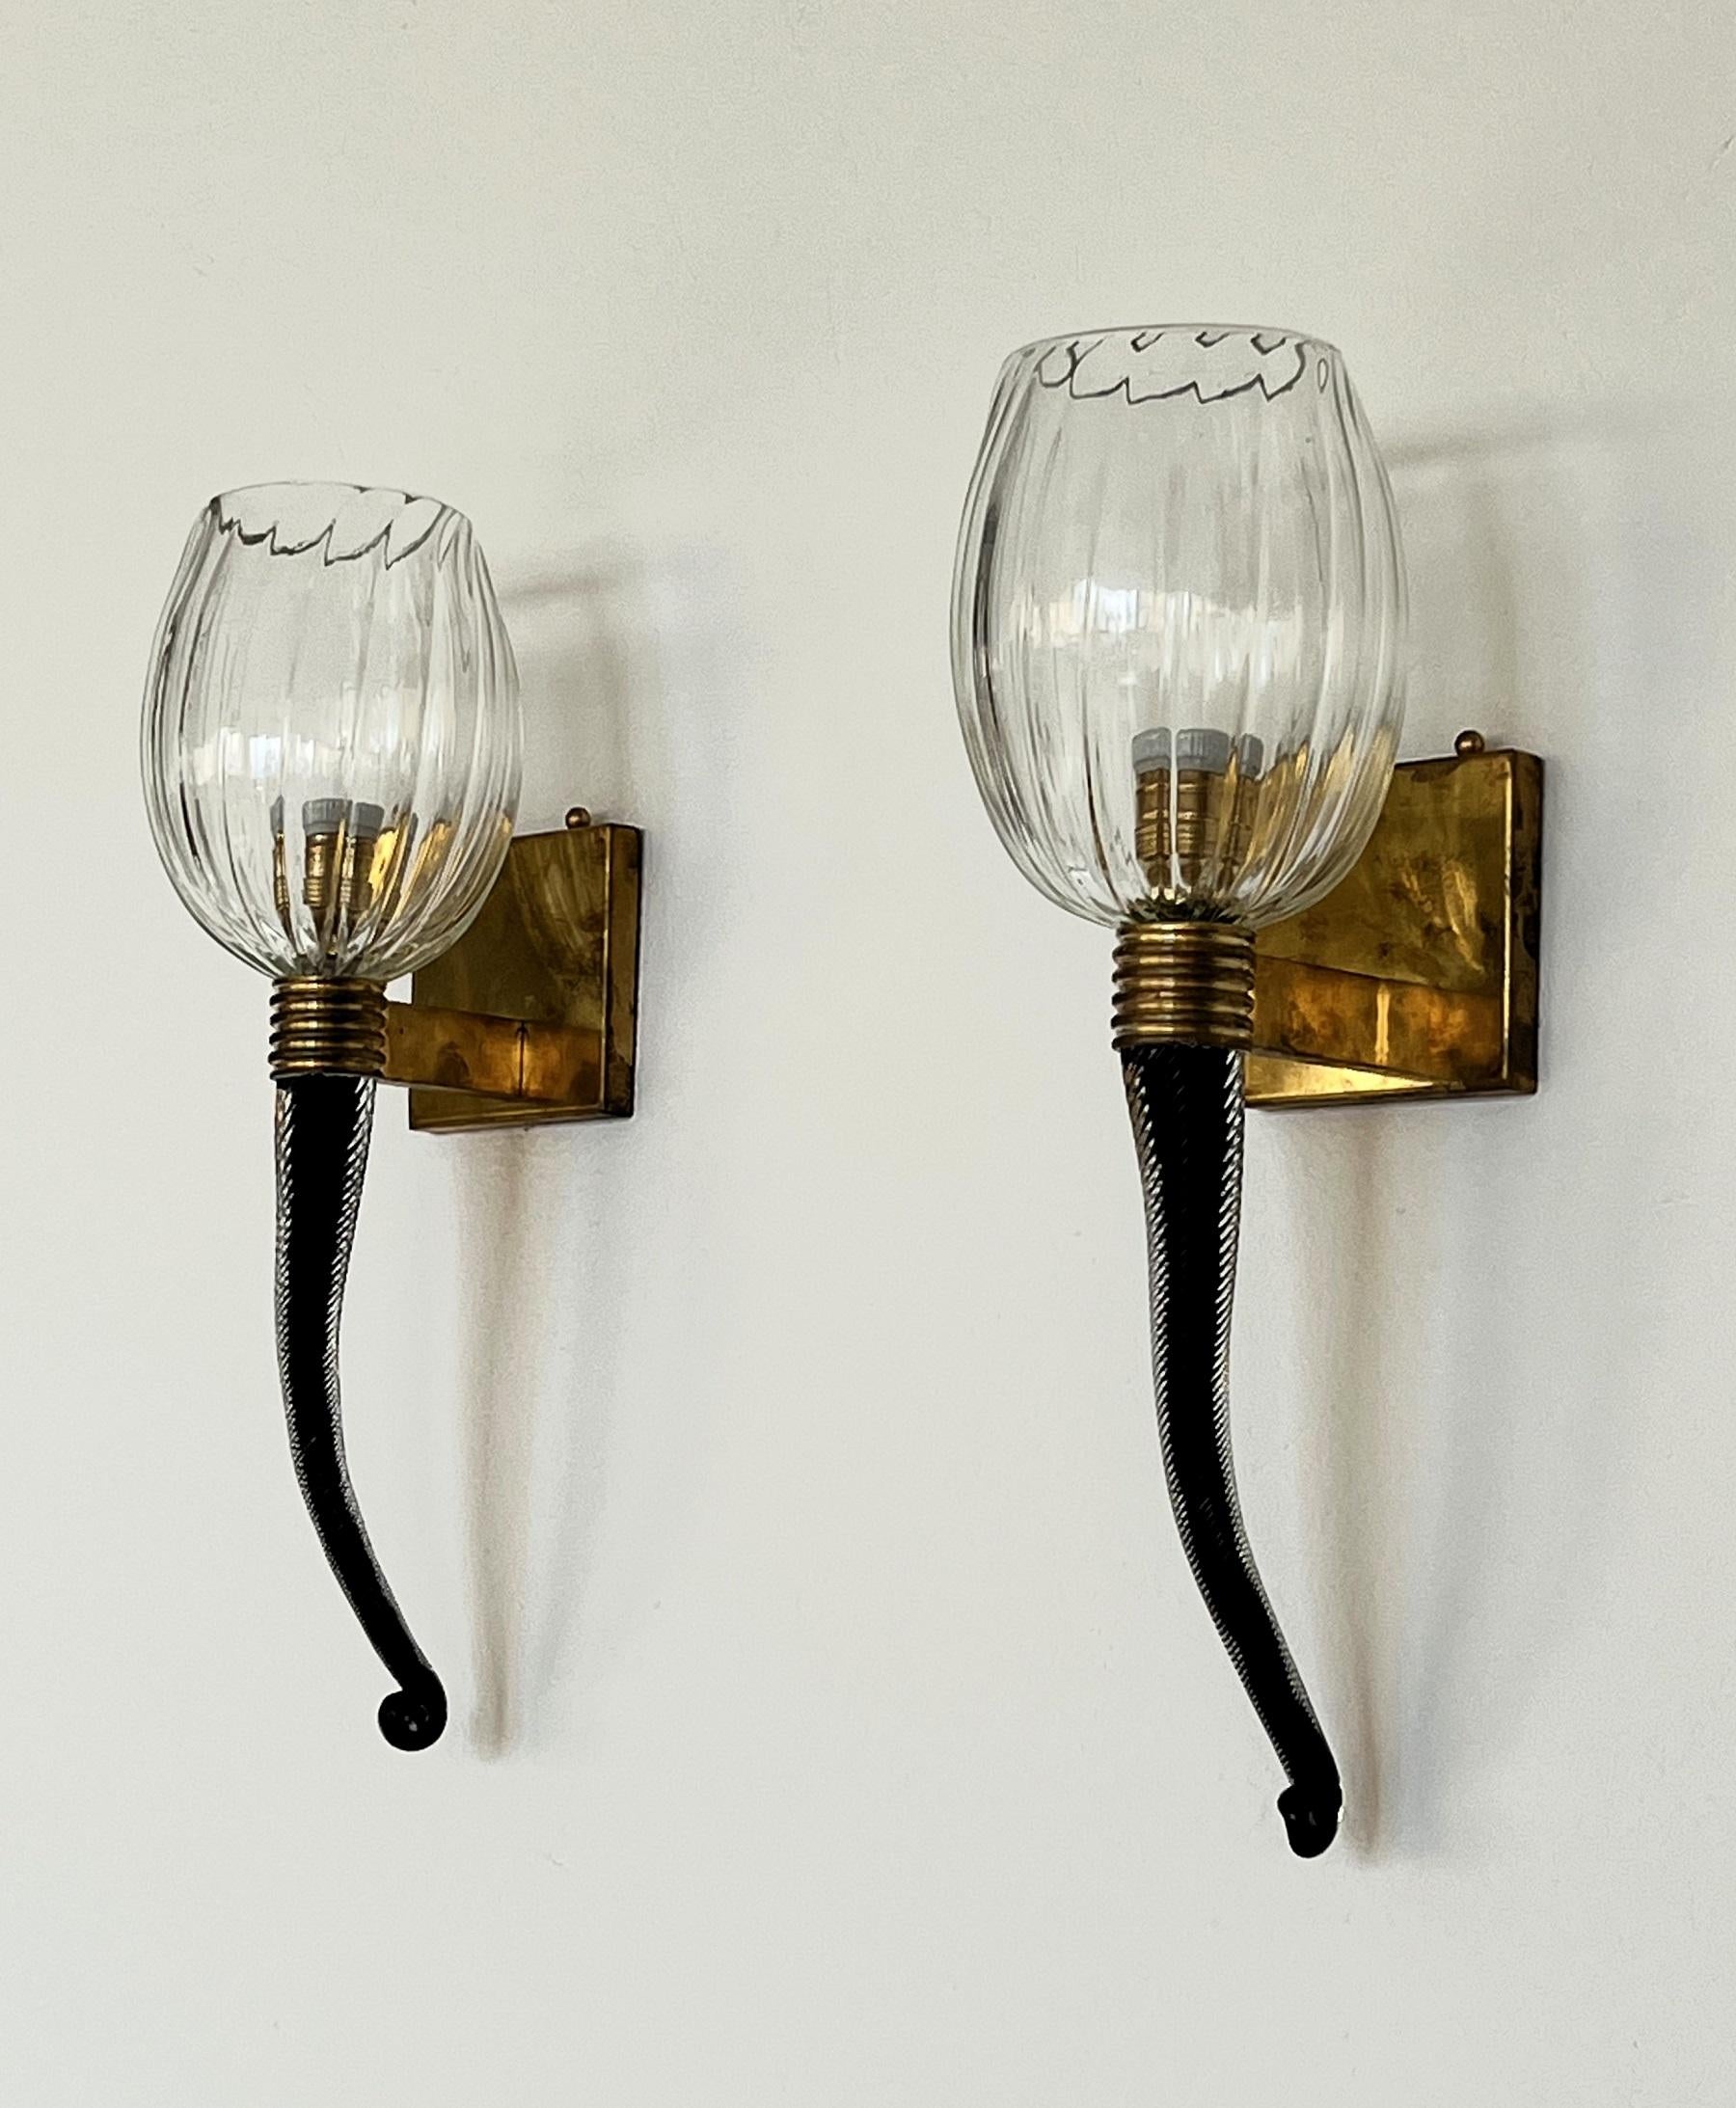 Italian Large Murano Glass Wall Lights or Sconces in Barovier Toso Style, 1990s For Sale 1